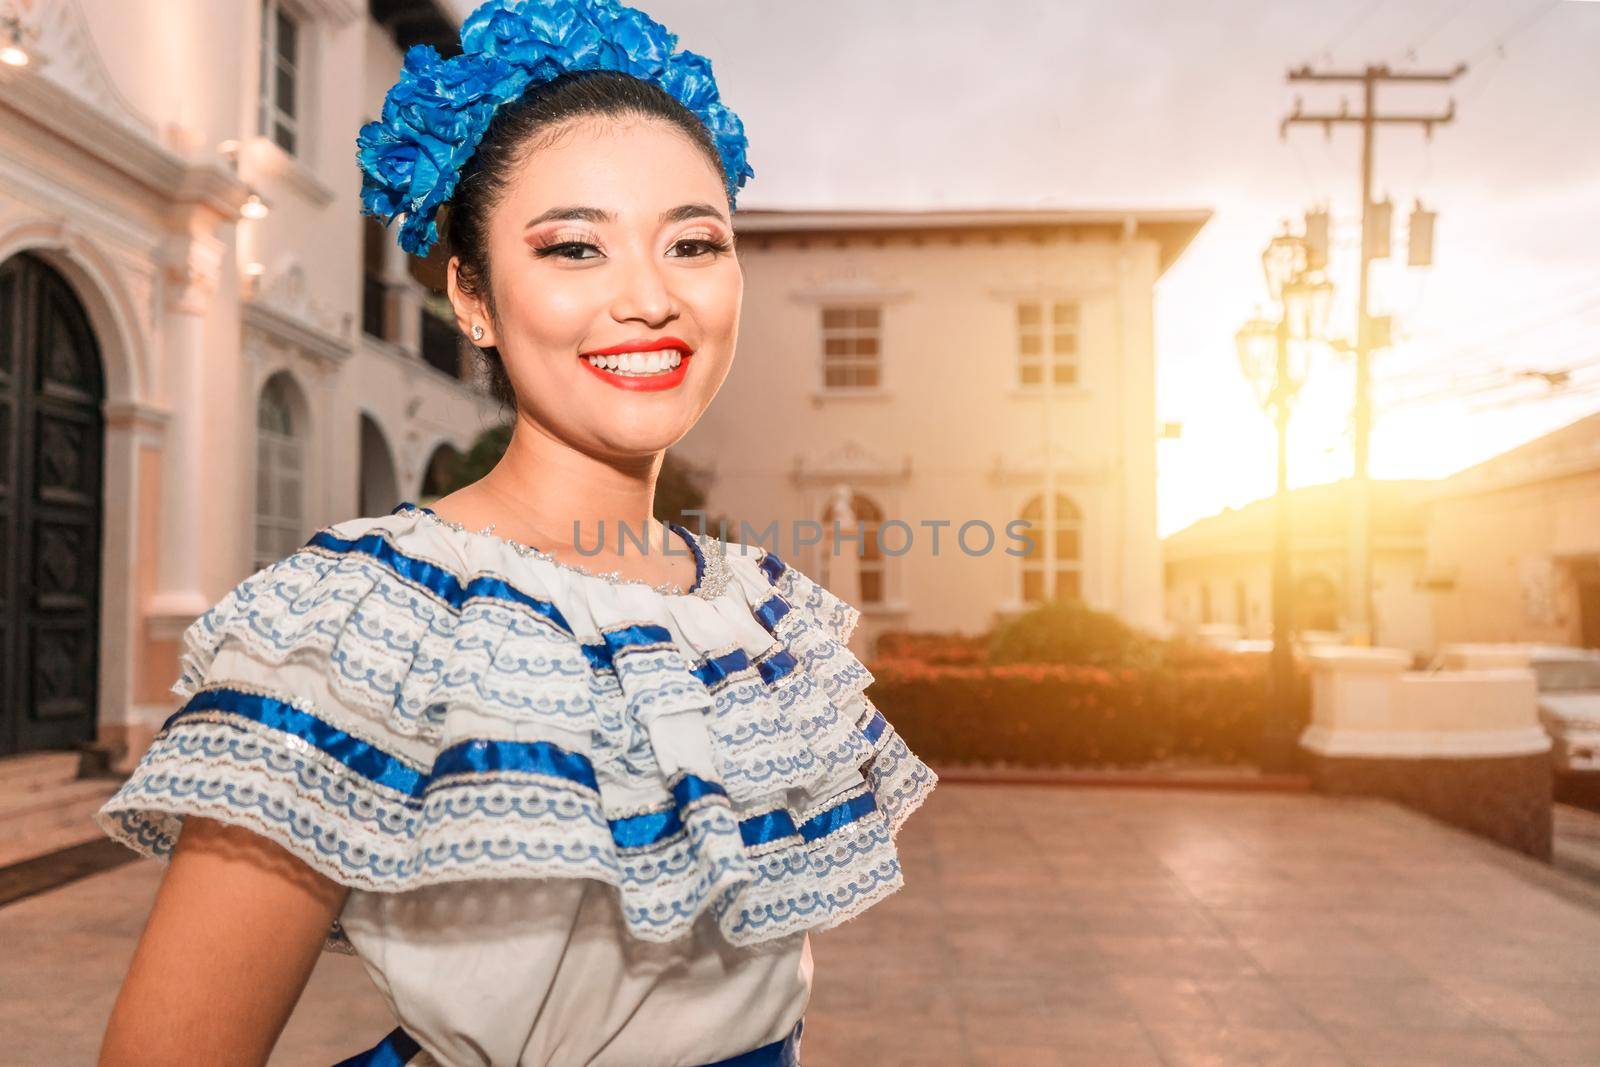 Traditional dancer from Nicaragua. Latin girl smiling with the traditional dress of Mexico, Central and South America, looking at the camera by cfalvarez